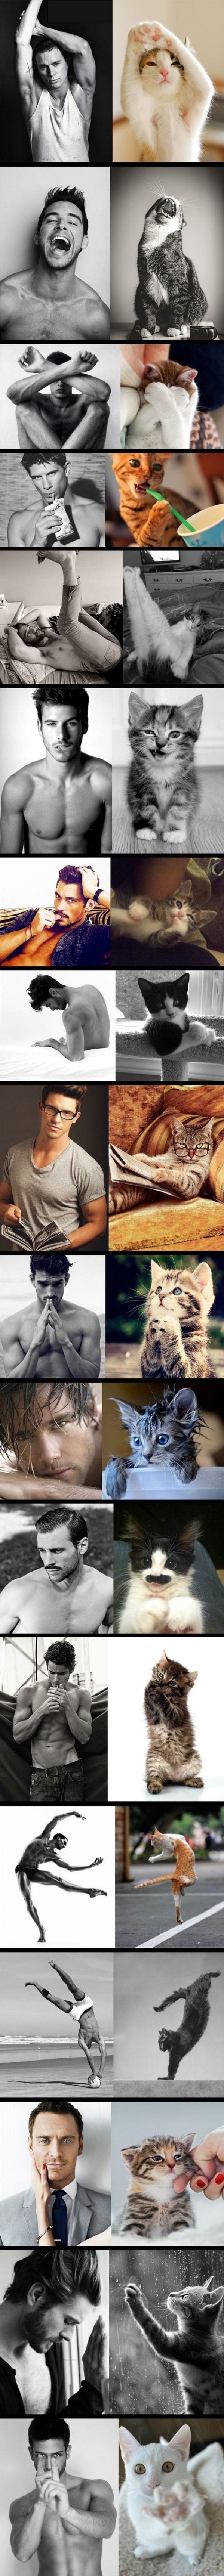 The Husband Catalog (43 pics) – kitten; kitty; cats  My favorite is the one of t